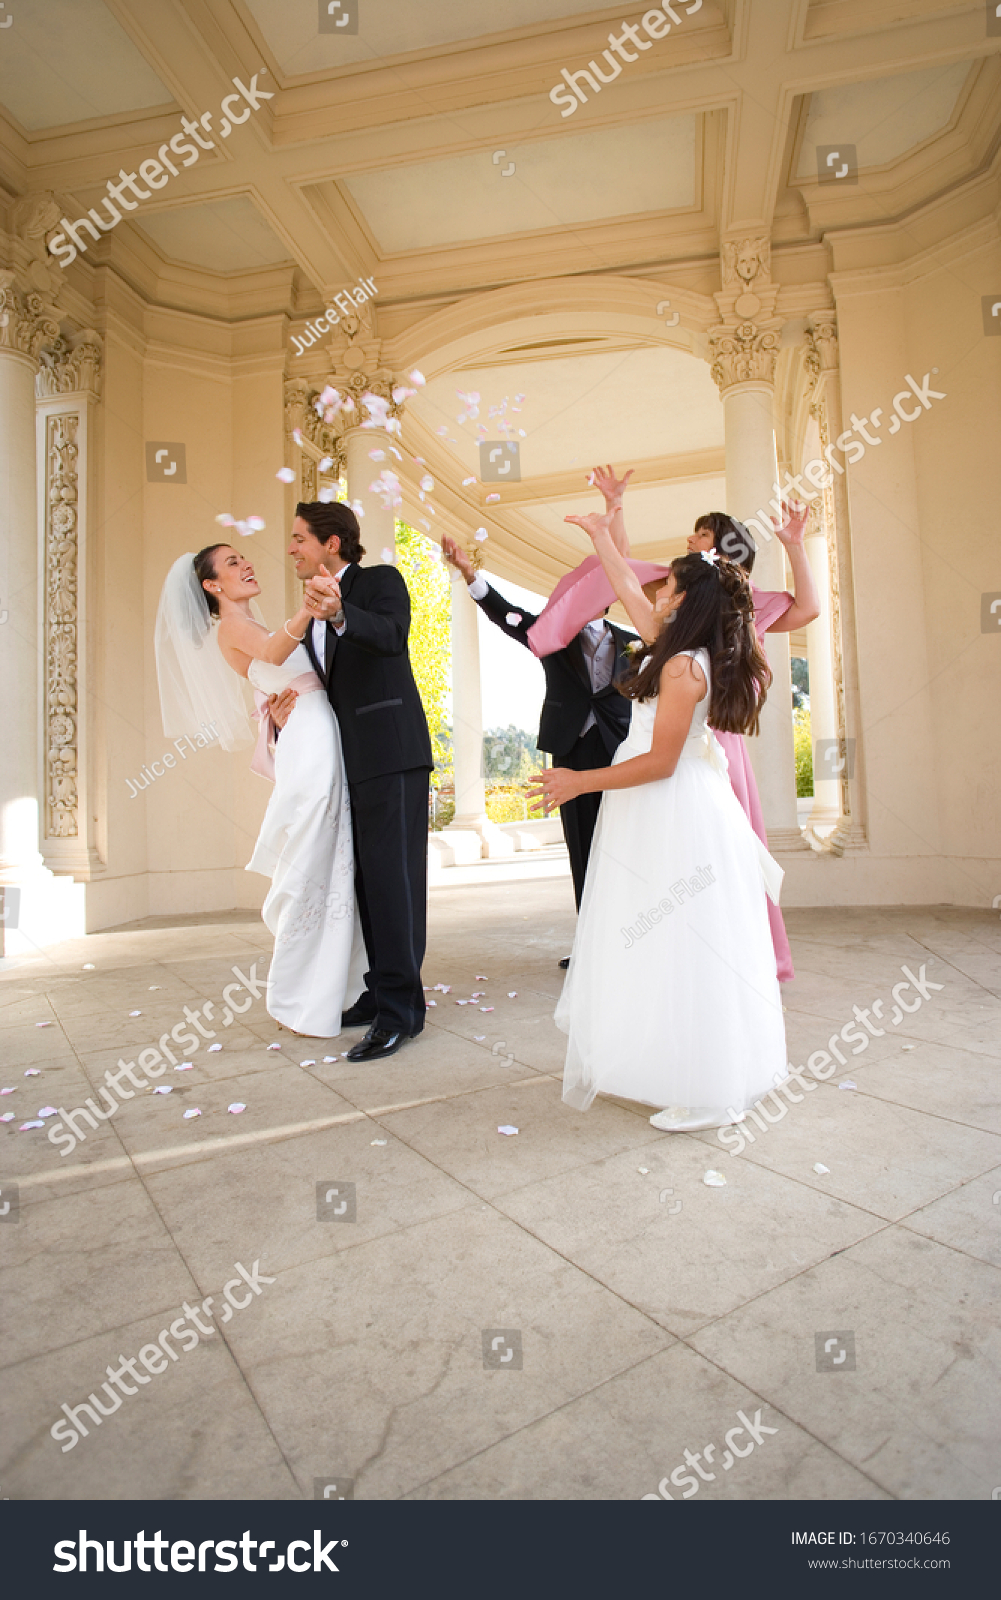 Bride and groom hugging at wedding as guests throw confetti #1670340646